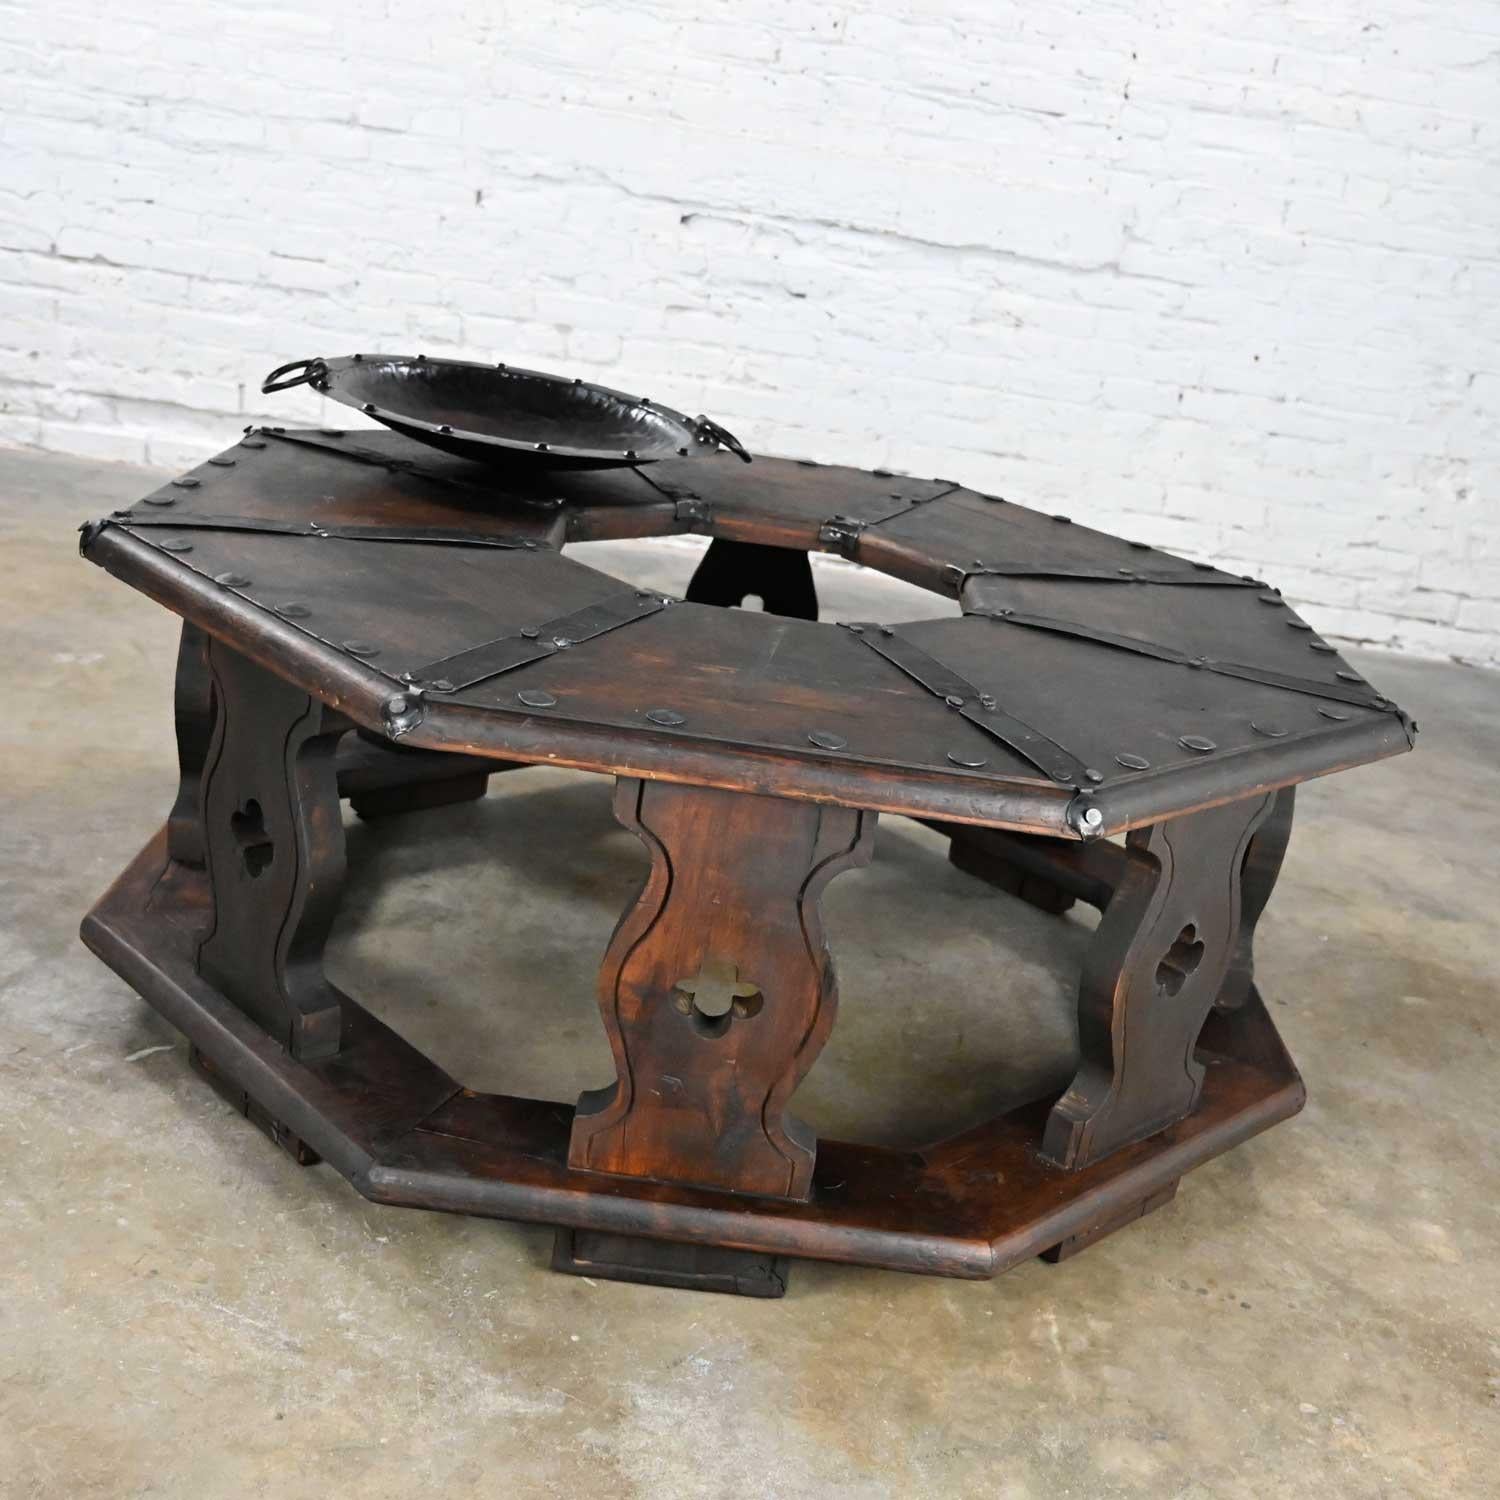 Spanish Colonial Vintage Spanish Revival Rustic Brazier Coffee Table Style Artes De Mexico Intern